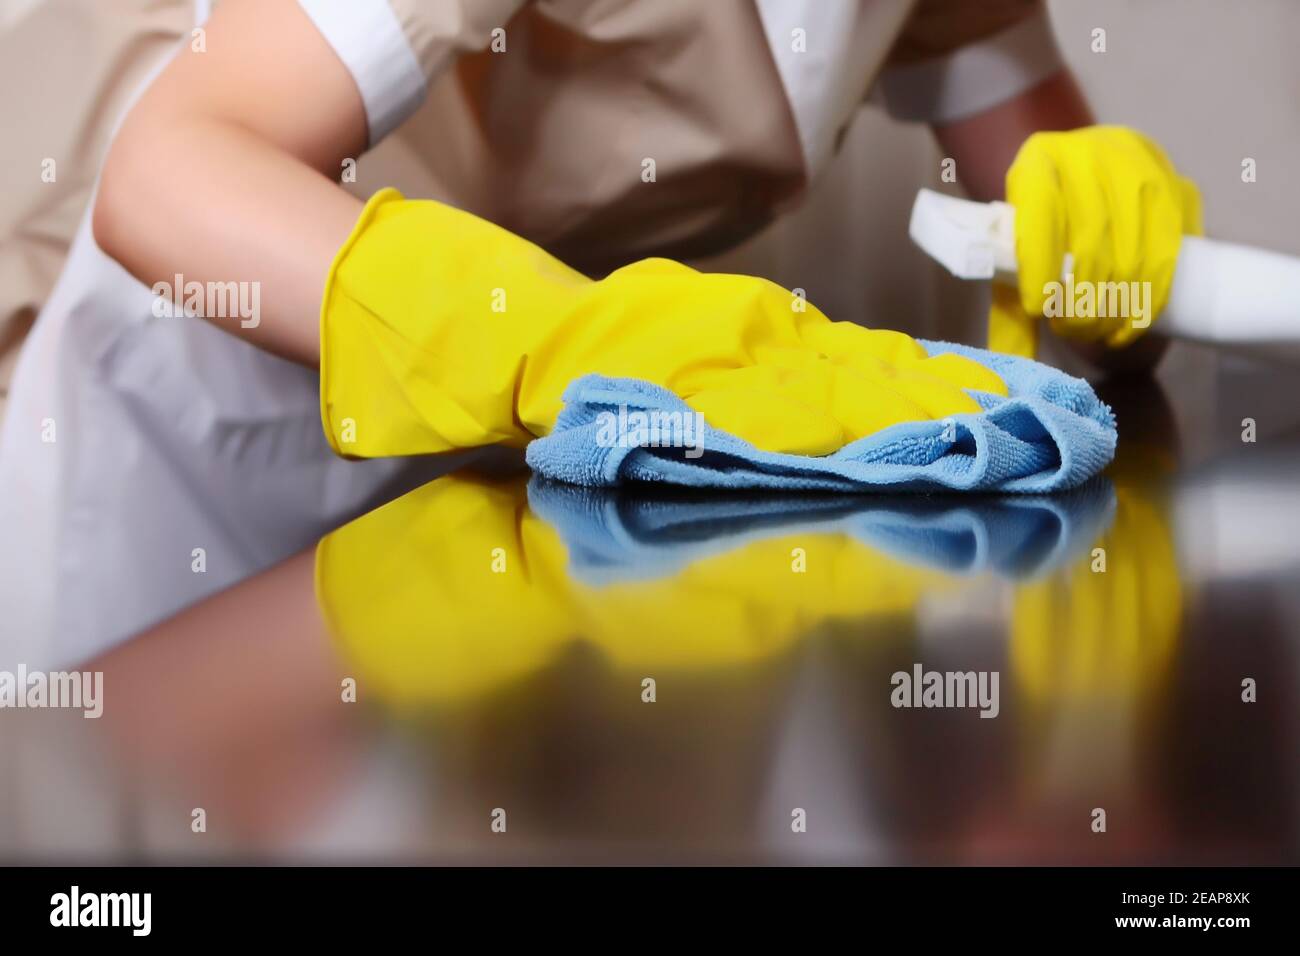 A uniformed maid is dusting the furniture. Cleaning in the hotel room. The person is unrecognizable. Out of focus. The concept of hotel business and cleaning. High-quality service in the hotel. Hands in protective gloves. Stock Photo